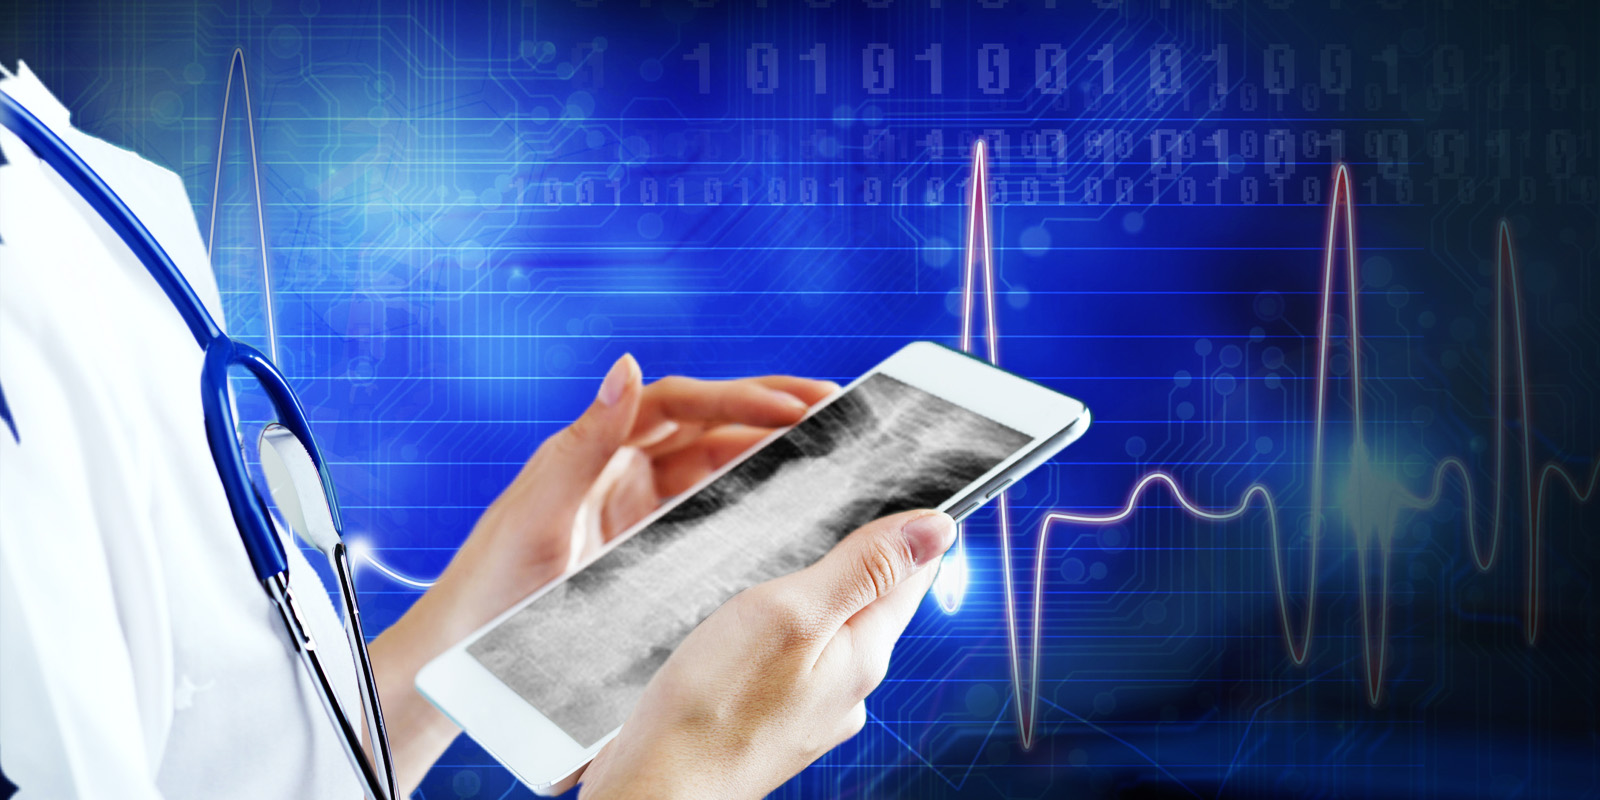 Telehealth & EHR Meaningful Use Payments—Expect Greater Scrutiny in Upcoming Medicare Audits